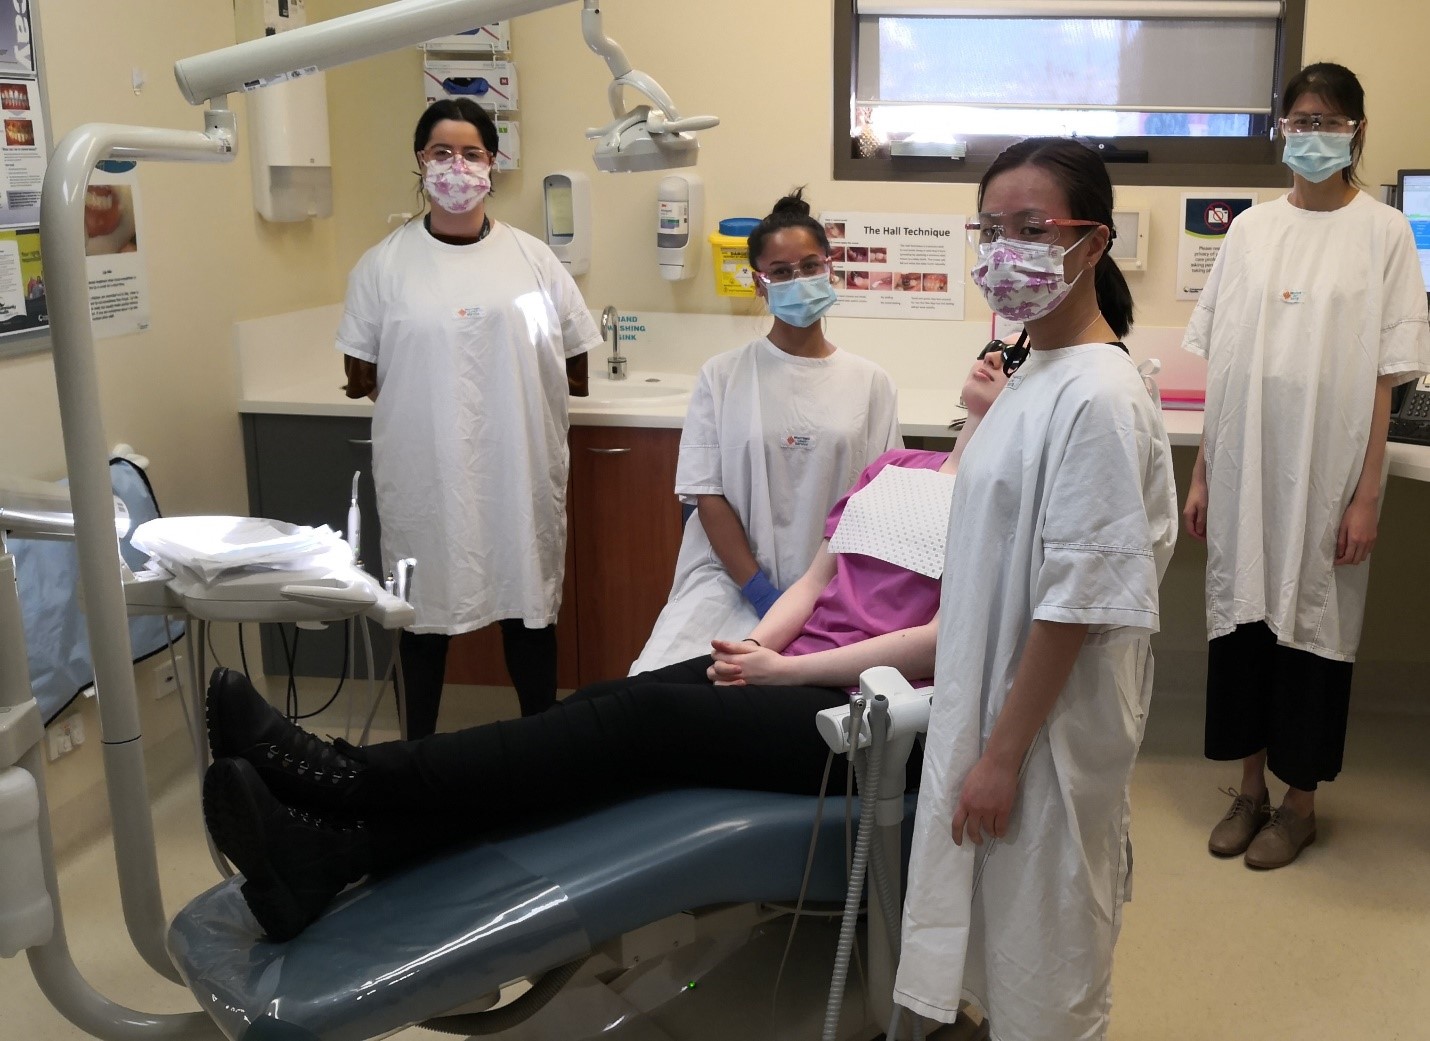 Final year Bachelor of Oral Health students Natasha Prasad, Vanessa Tu and Serlin Ching happy to be providing treatment at the Morwell clinic. Their supervisor, Oral Health Therapist, Nicoletta Psilos (left), was herself a University of Melbourne graduate 5 years ago.